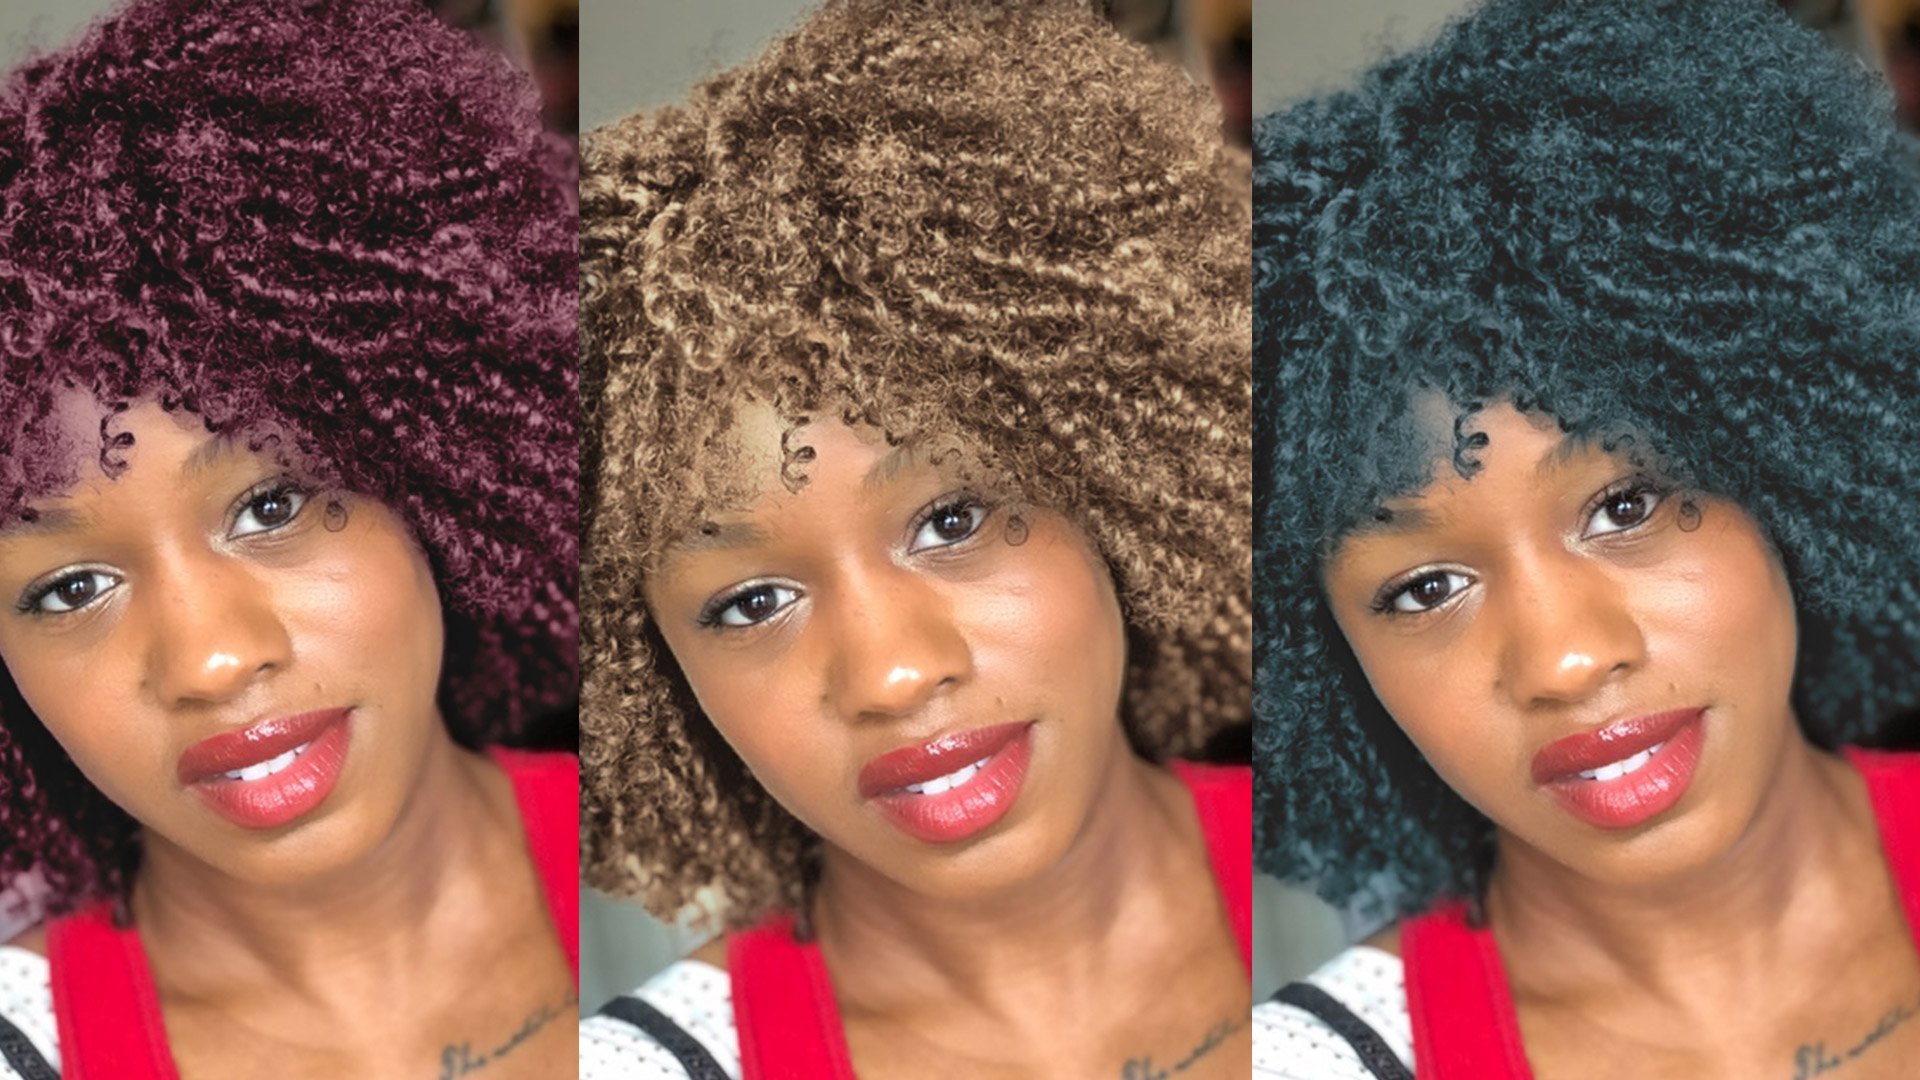 Try On New Hair Colors With The Hair Color Genius - L'Oréal Paris